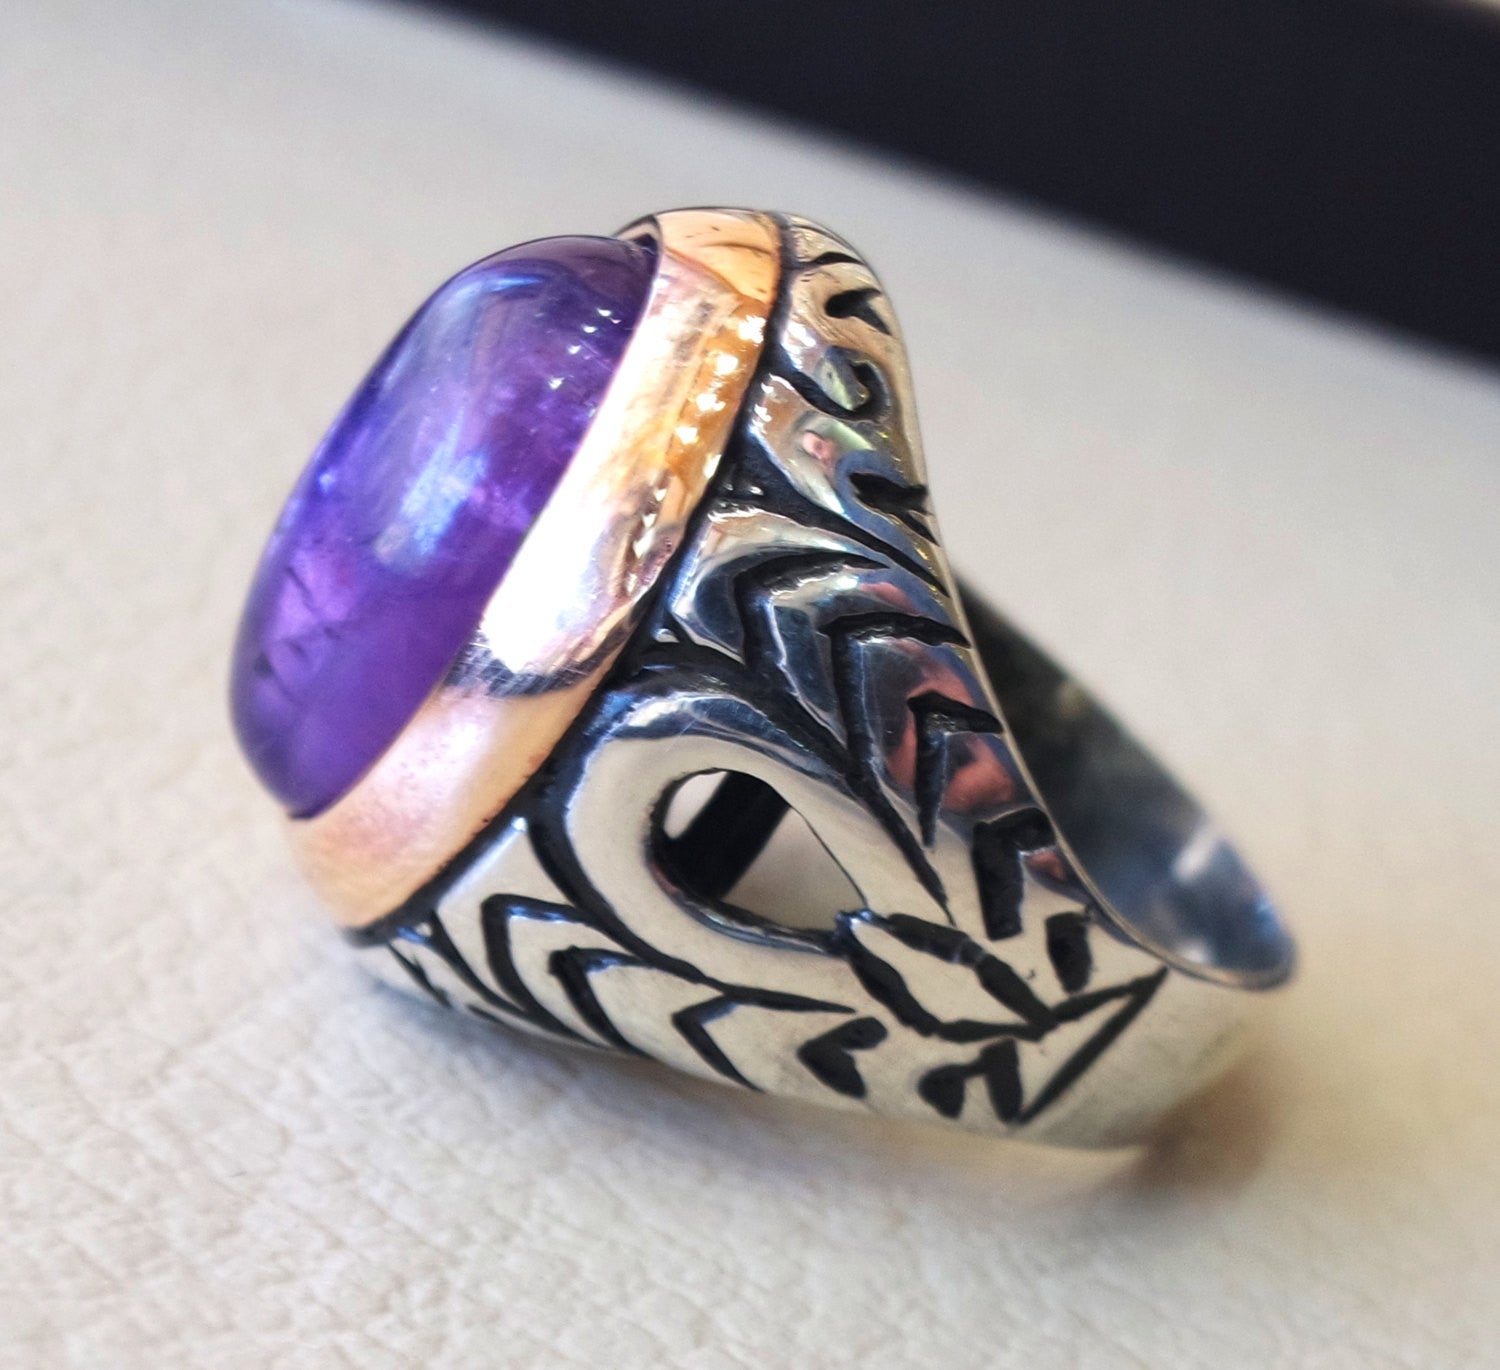 amethyst agate men ring natural purple stone silver 925  vintage arabic turkish ottoman bronze frame man jewelry oval cabochon all sizes